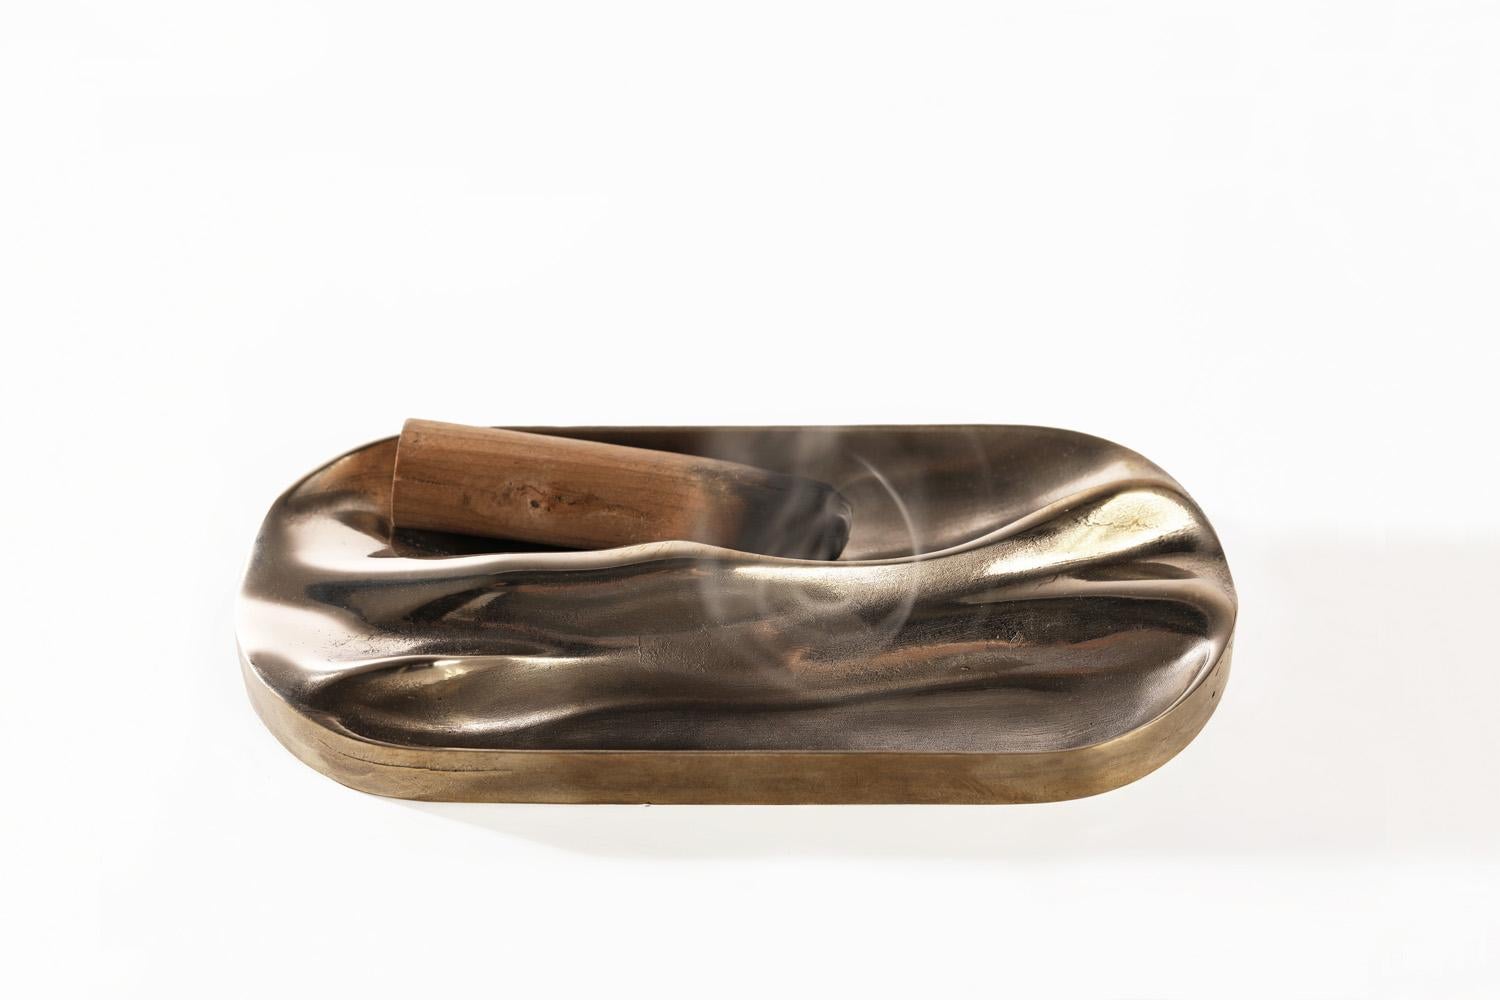 Mid-Century Modern Small Bronze Tray by Artist Vincent Pocsik for Lawson-Fenning, in Stock